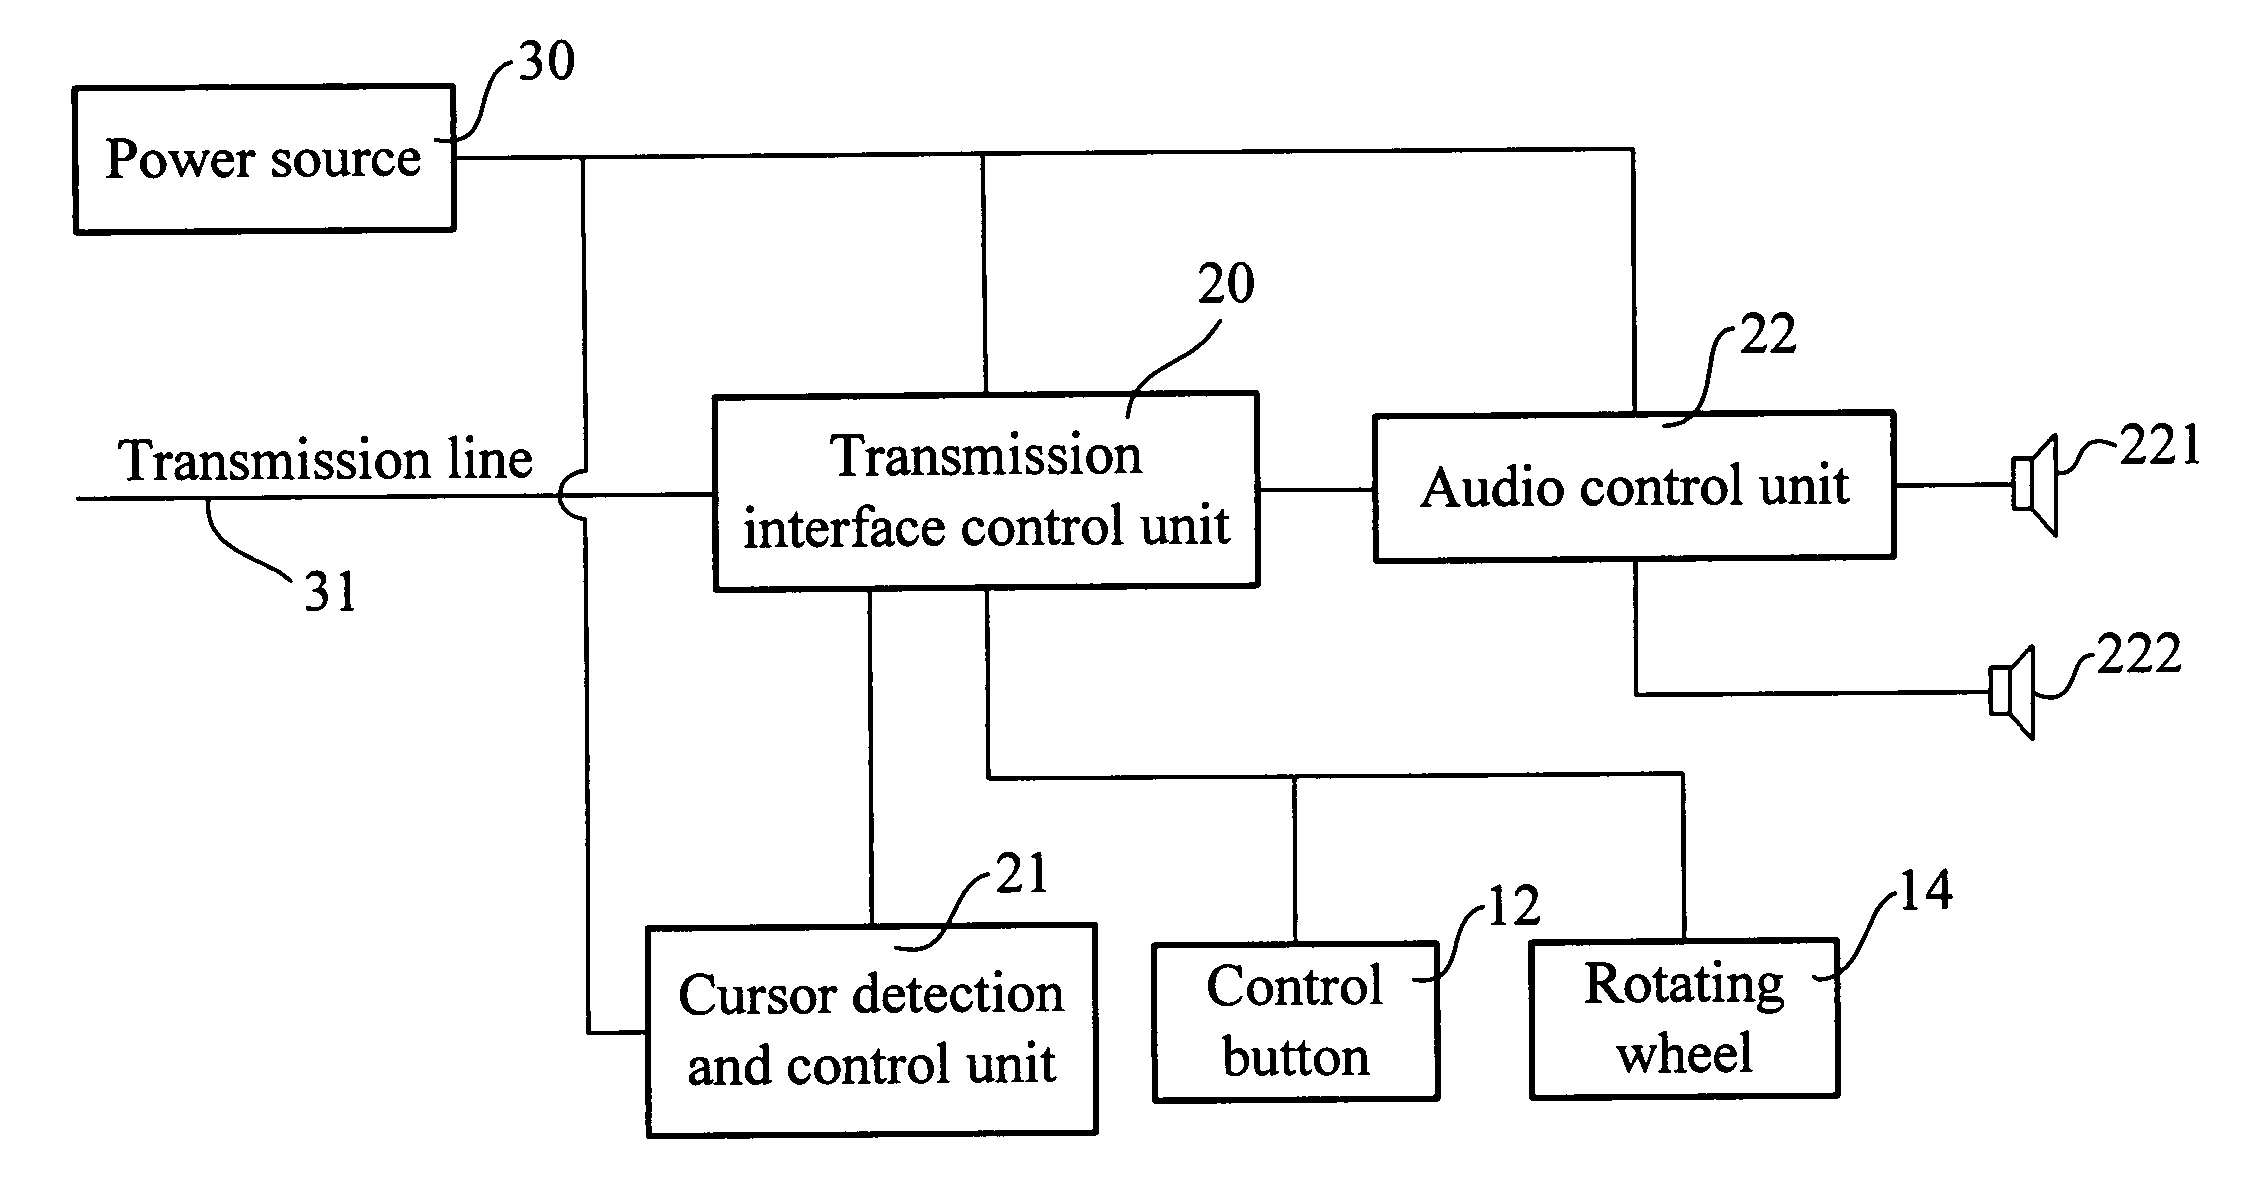 Telecommunication pointing device